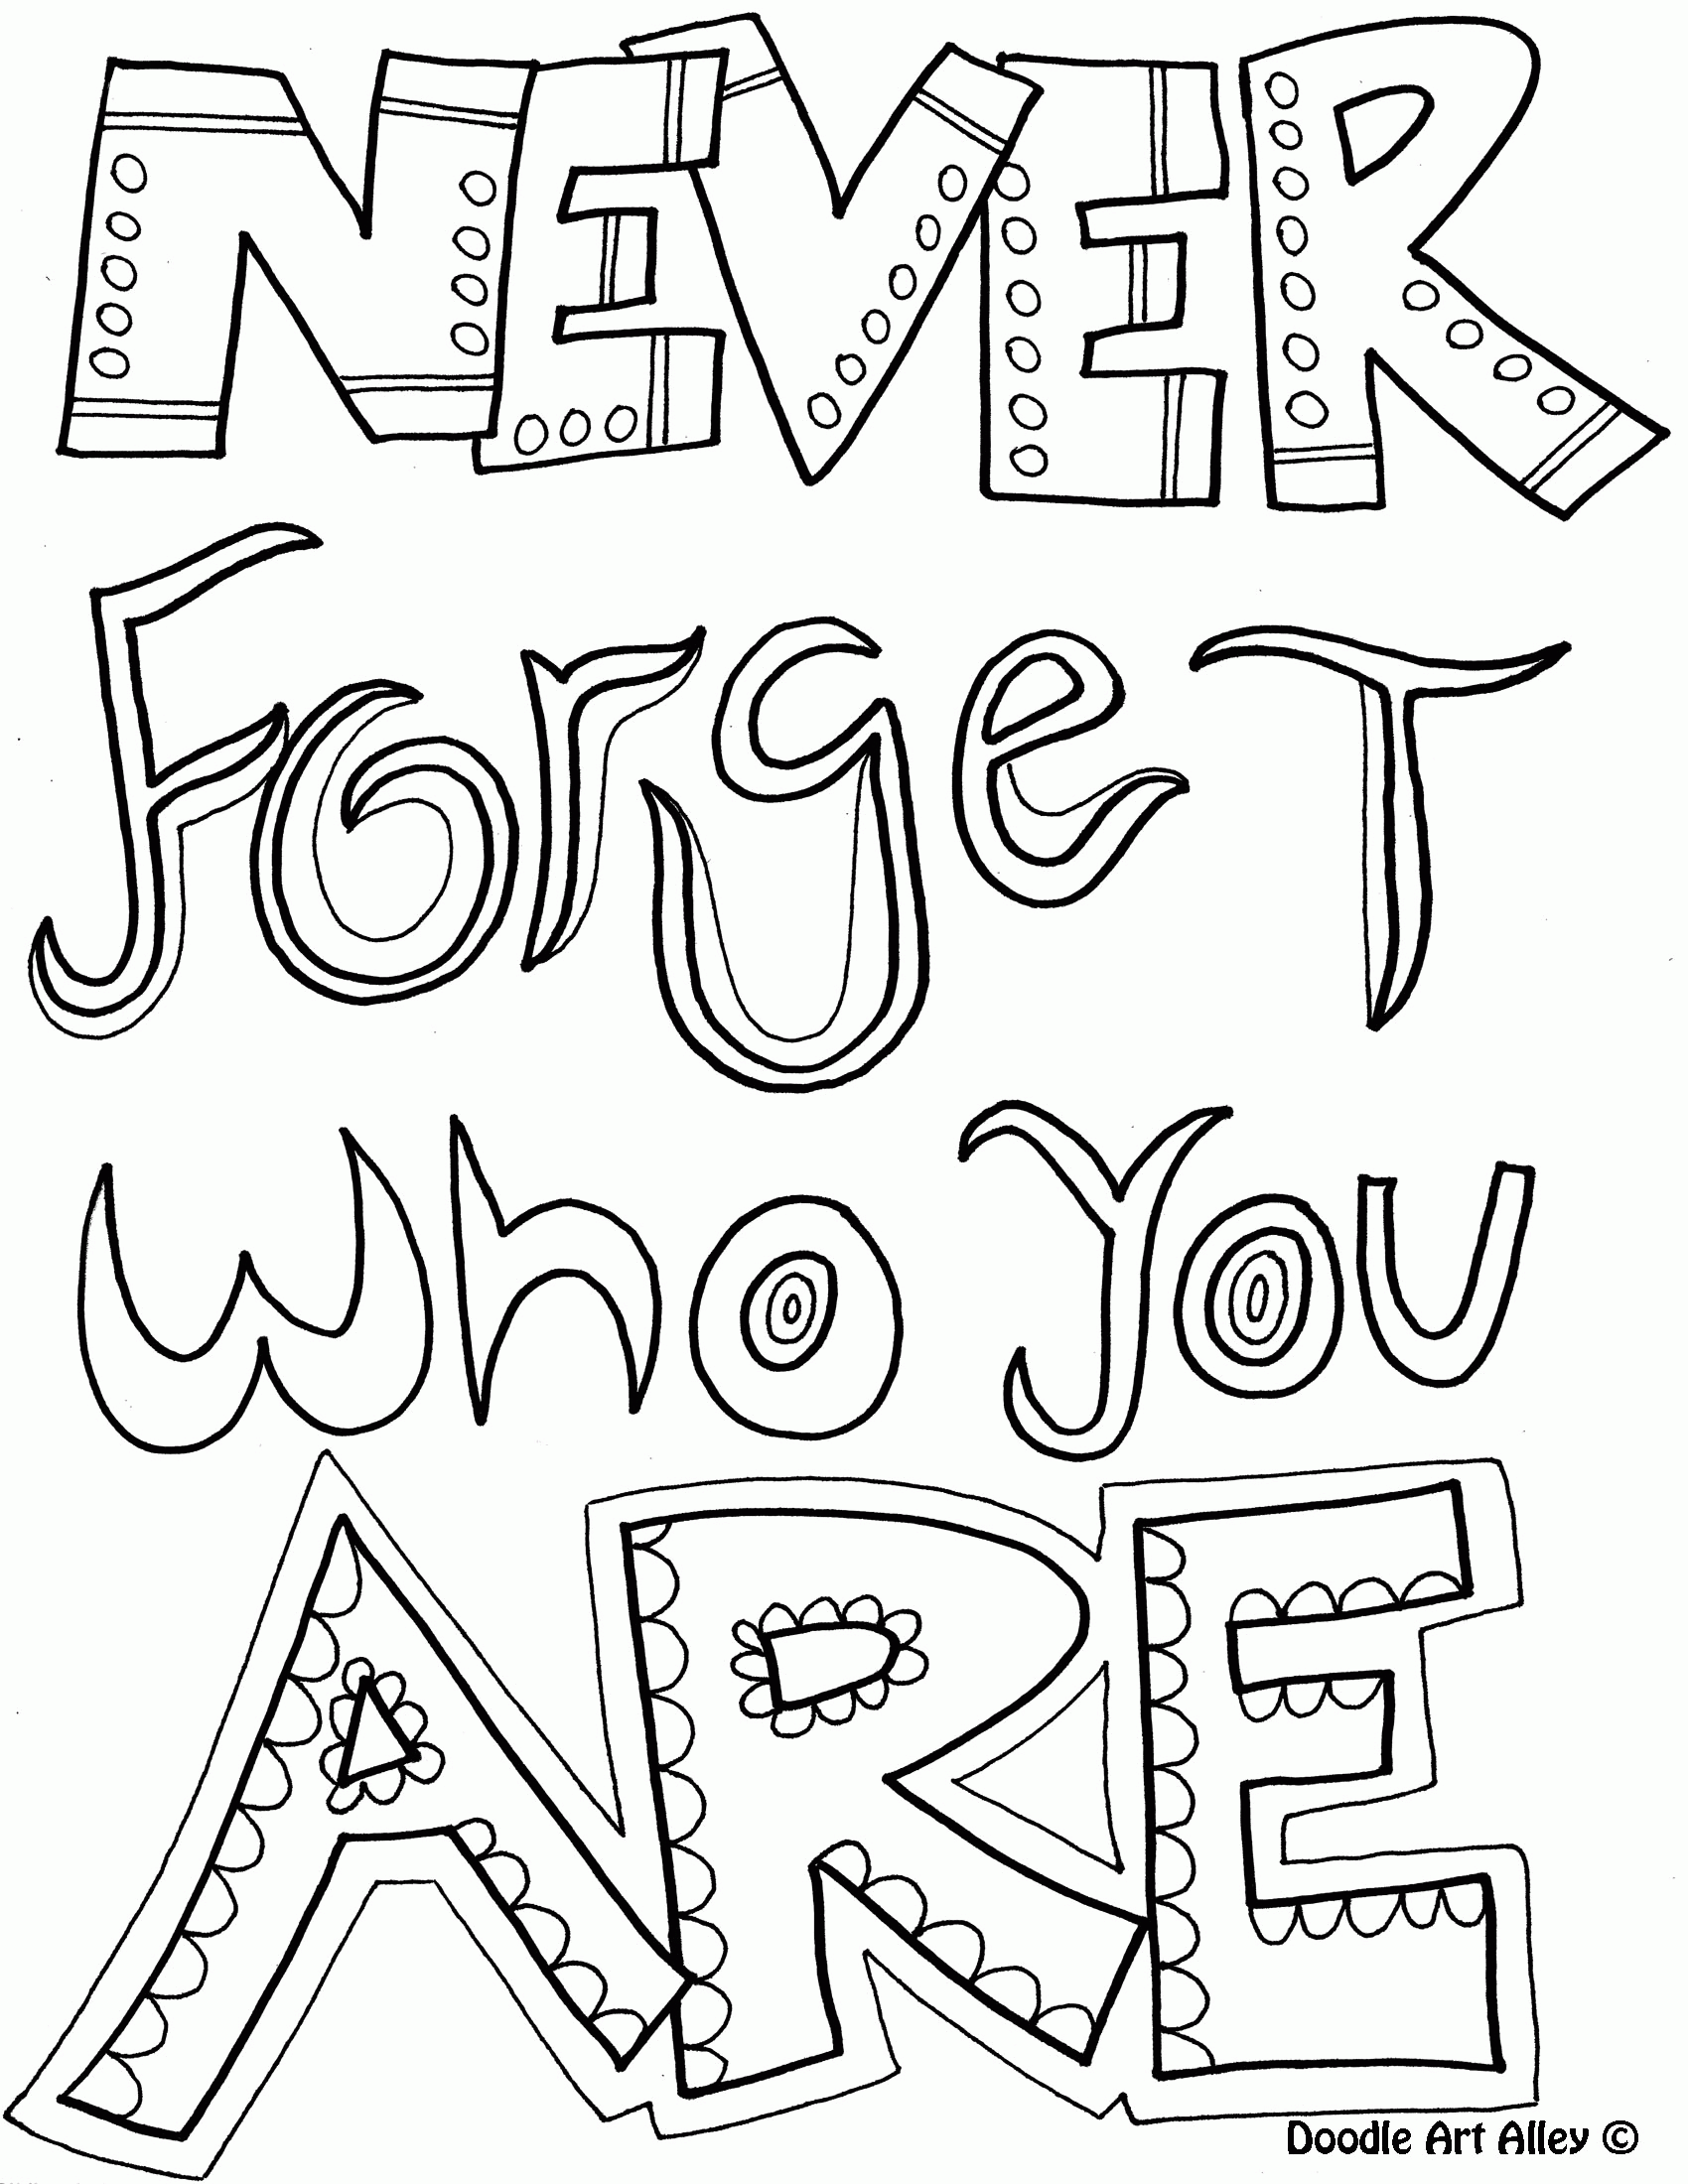 Free Coloring Pages Teens, Download Free Coloring Pages Teens png